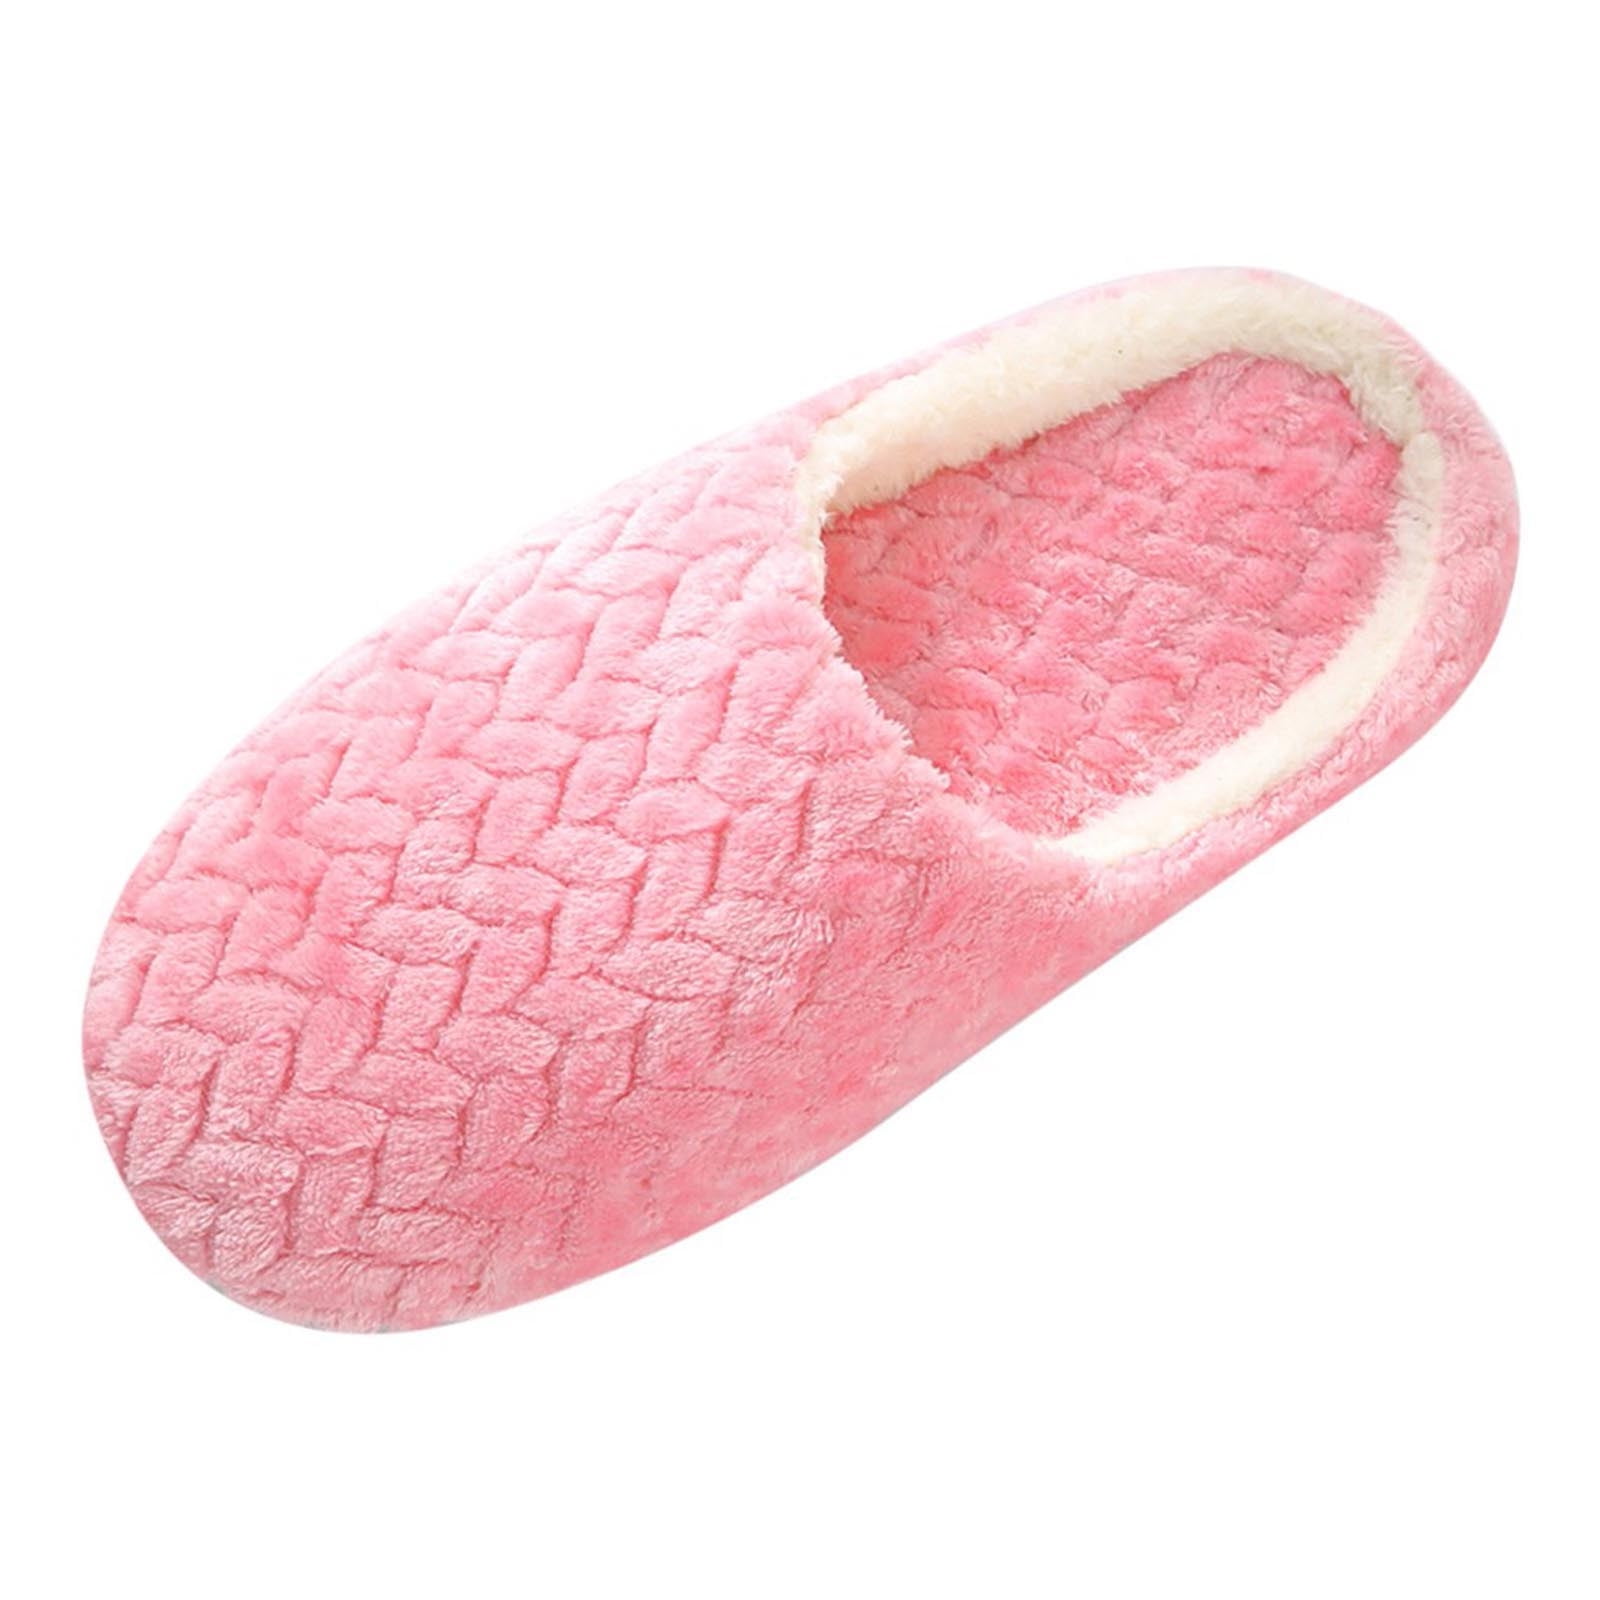 Chiccall Winter Warm Slippers, Comfy Rhombus Pattern Faux Fur House ...